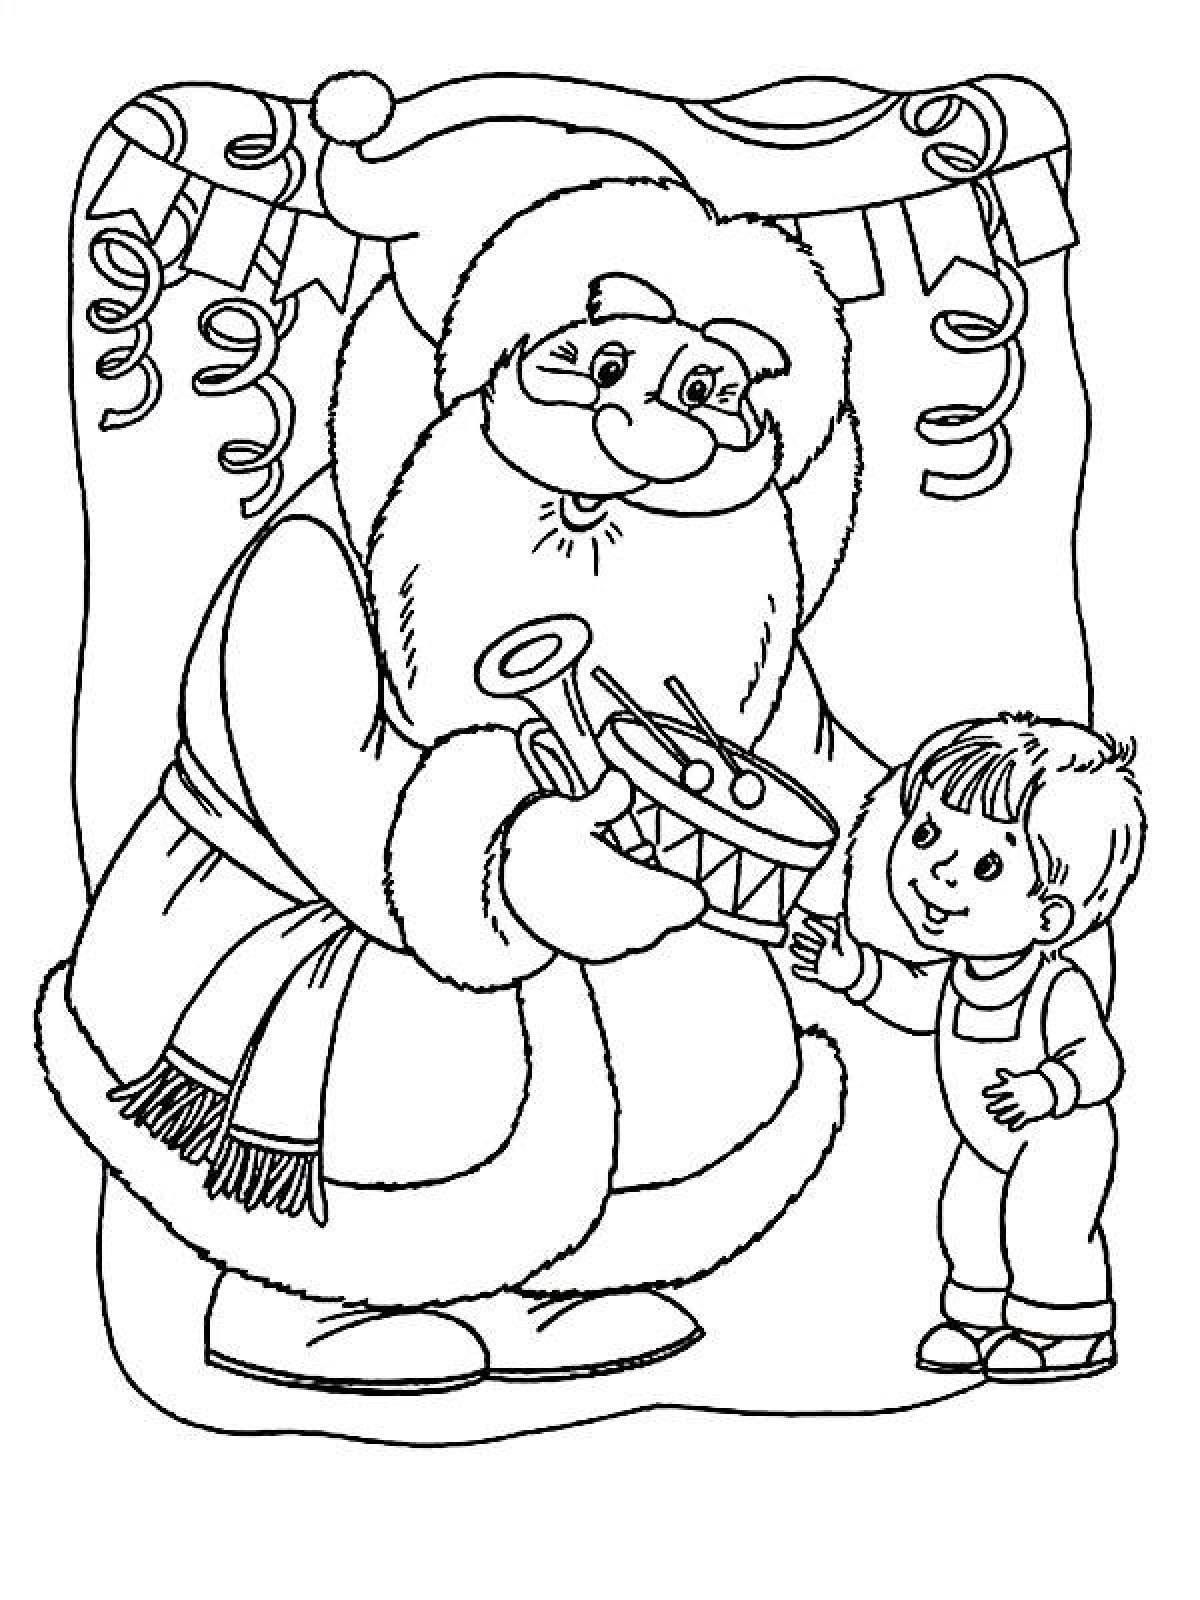 A gorgeous coloring book for the fairy tale Moroz Ivanovich